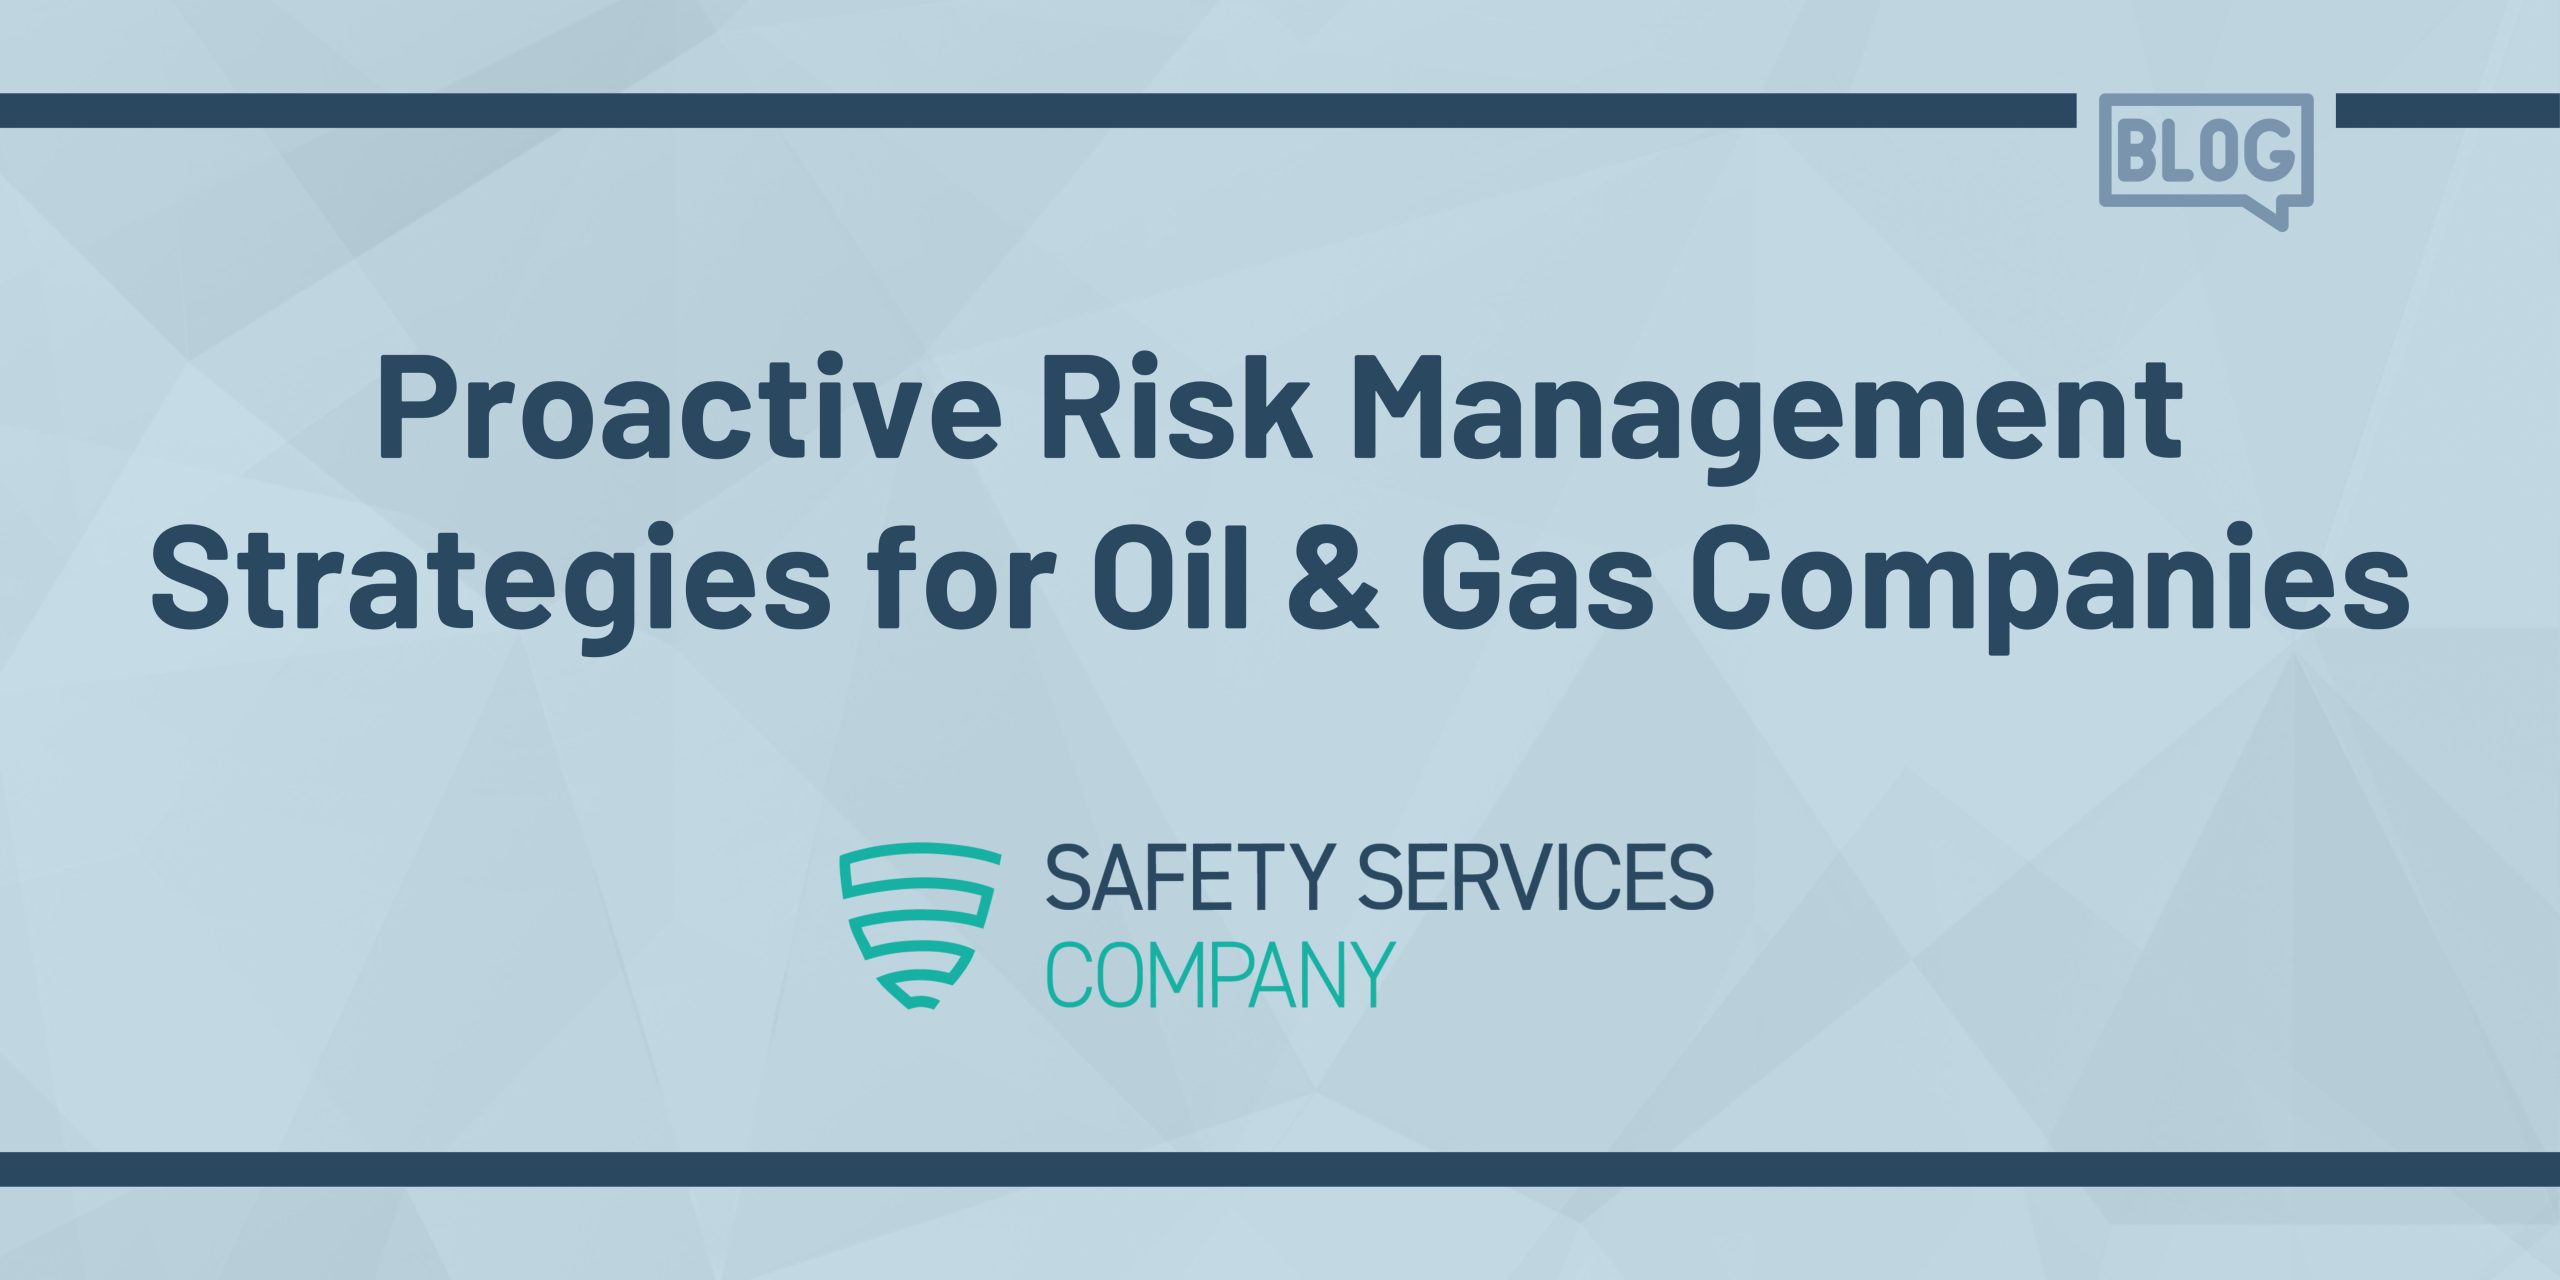 Proactive Risk Management Strategies for Oil & Gas Companies